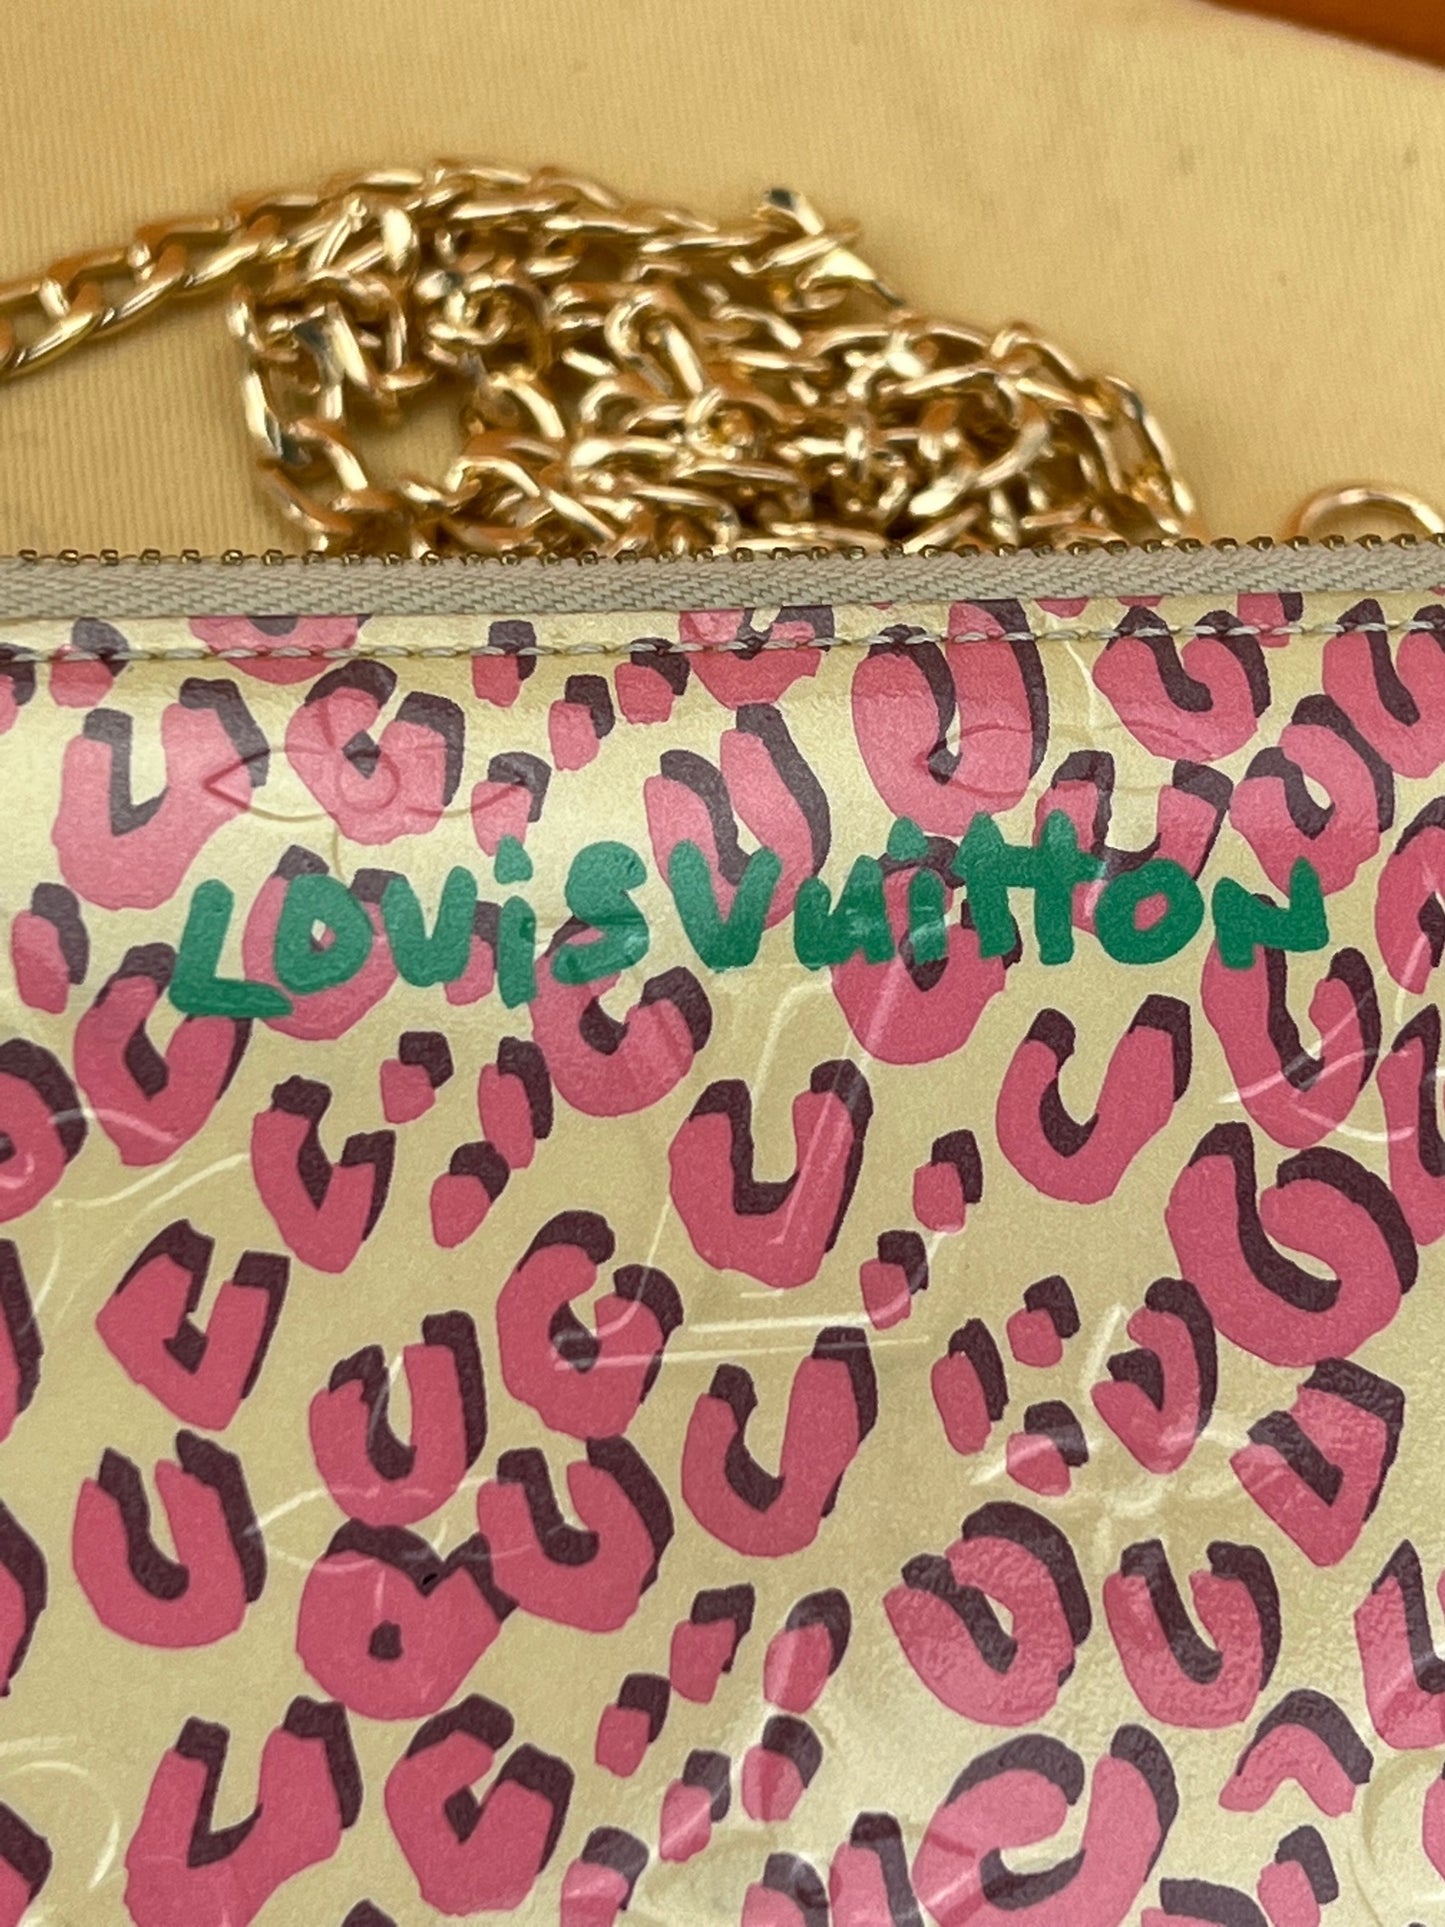 Louis Vuitton Wallet Zippy Stephan Sprouse Vernis Leopard W/Added Chain Crossbody Pre Owned